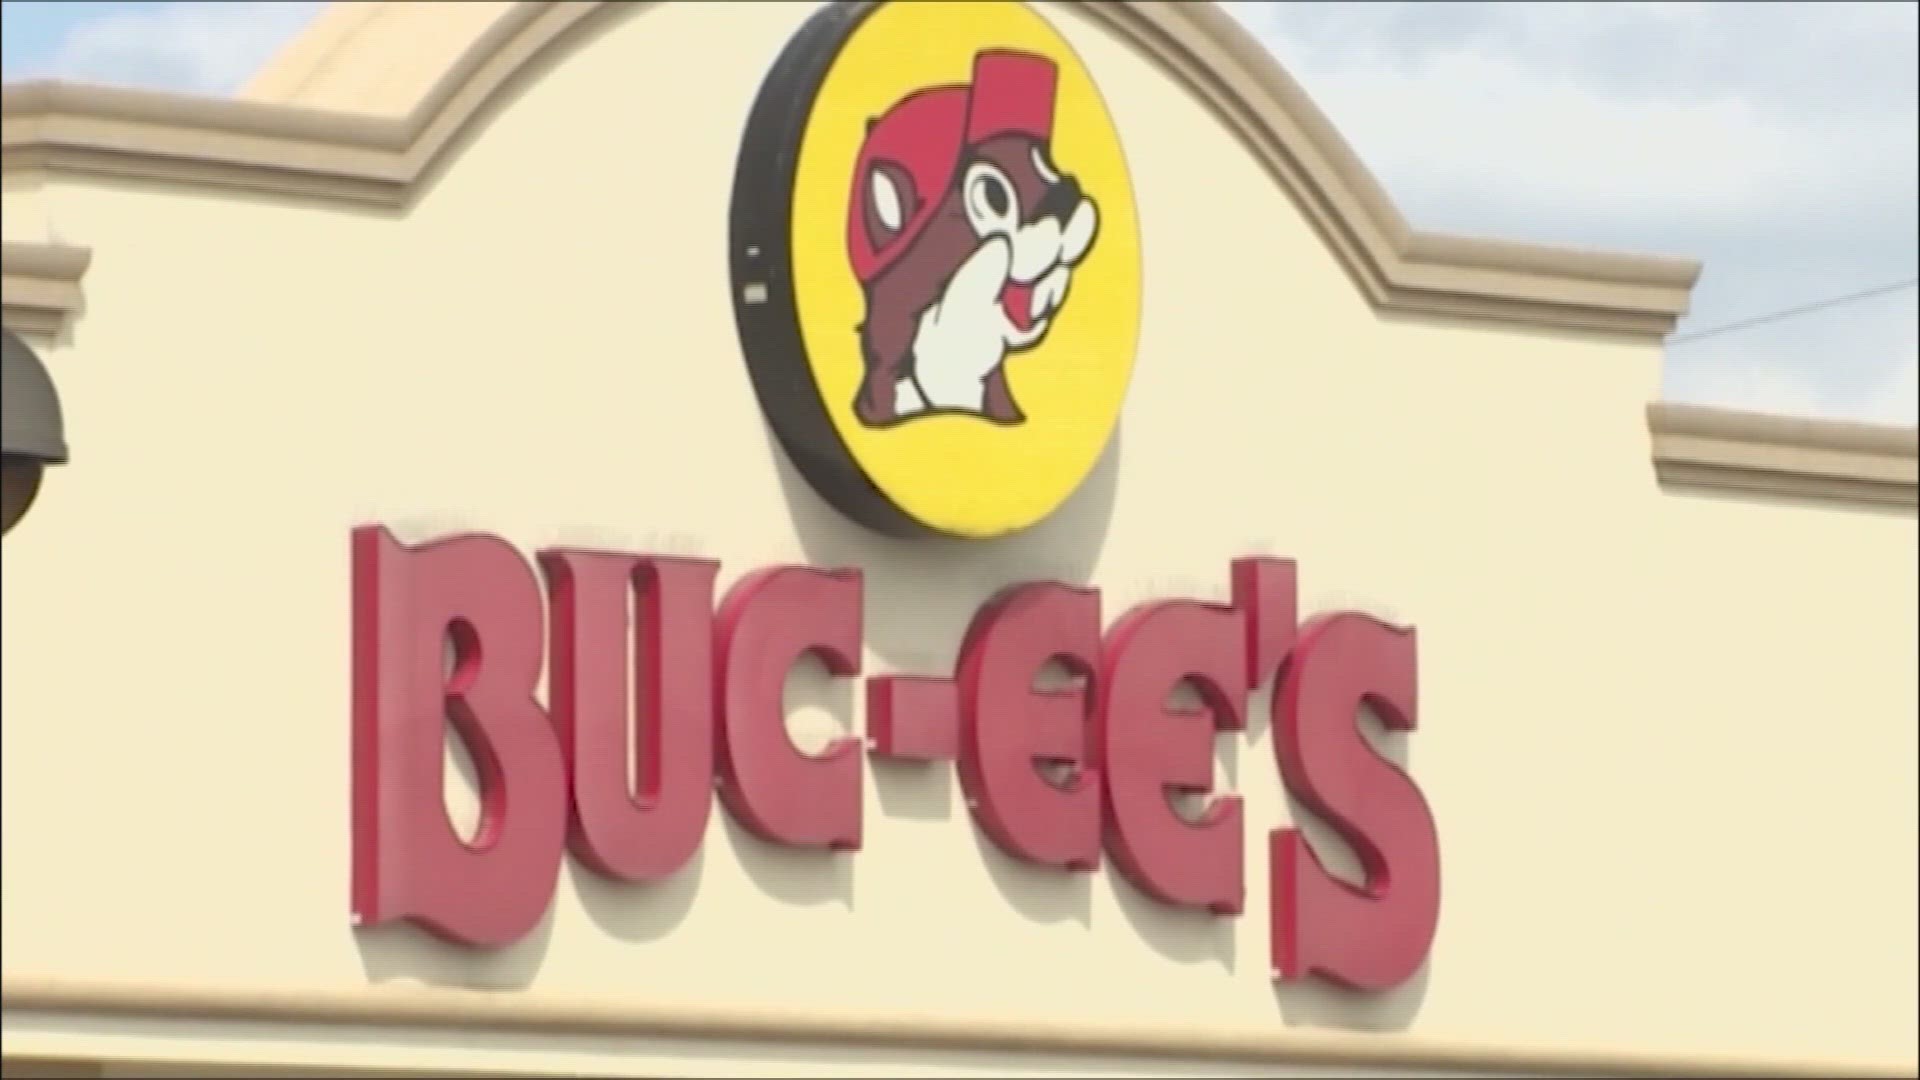 FinanceBuzz says they're looking for a Snack Reviewer to give their opinions on Buc-ee's top 25 snacks.